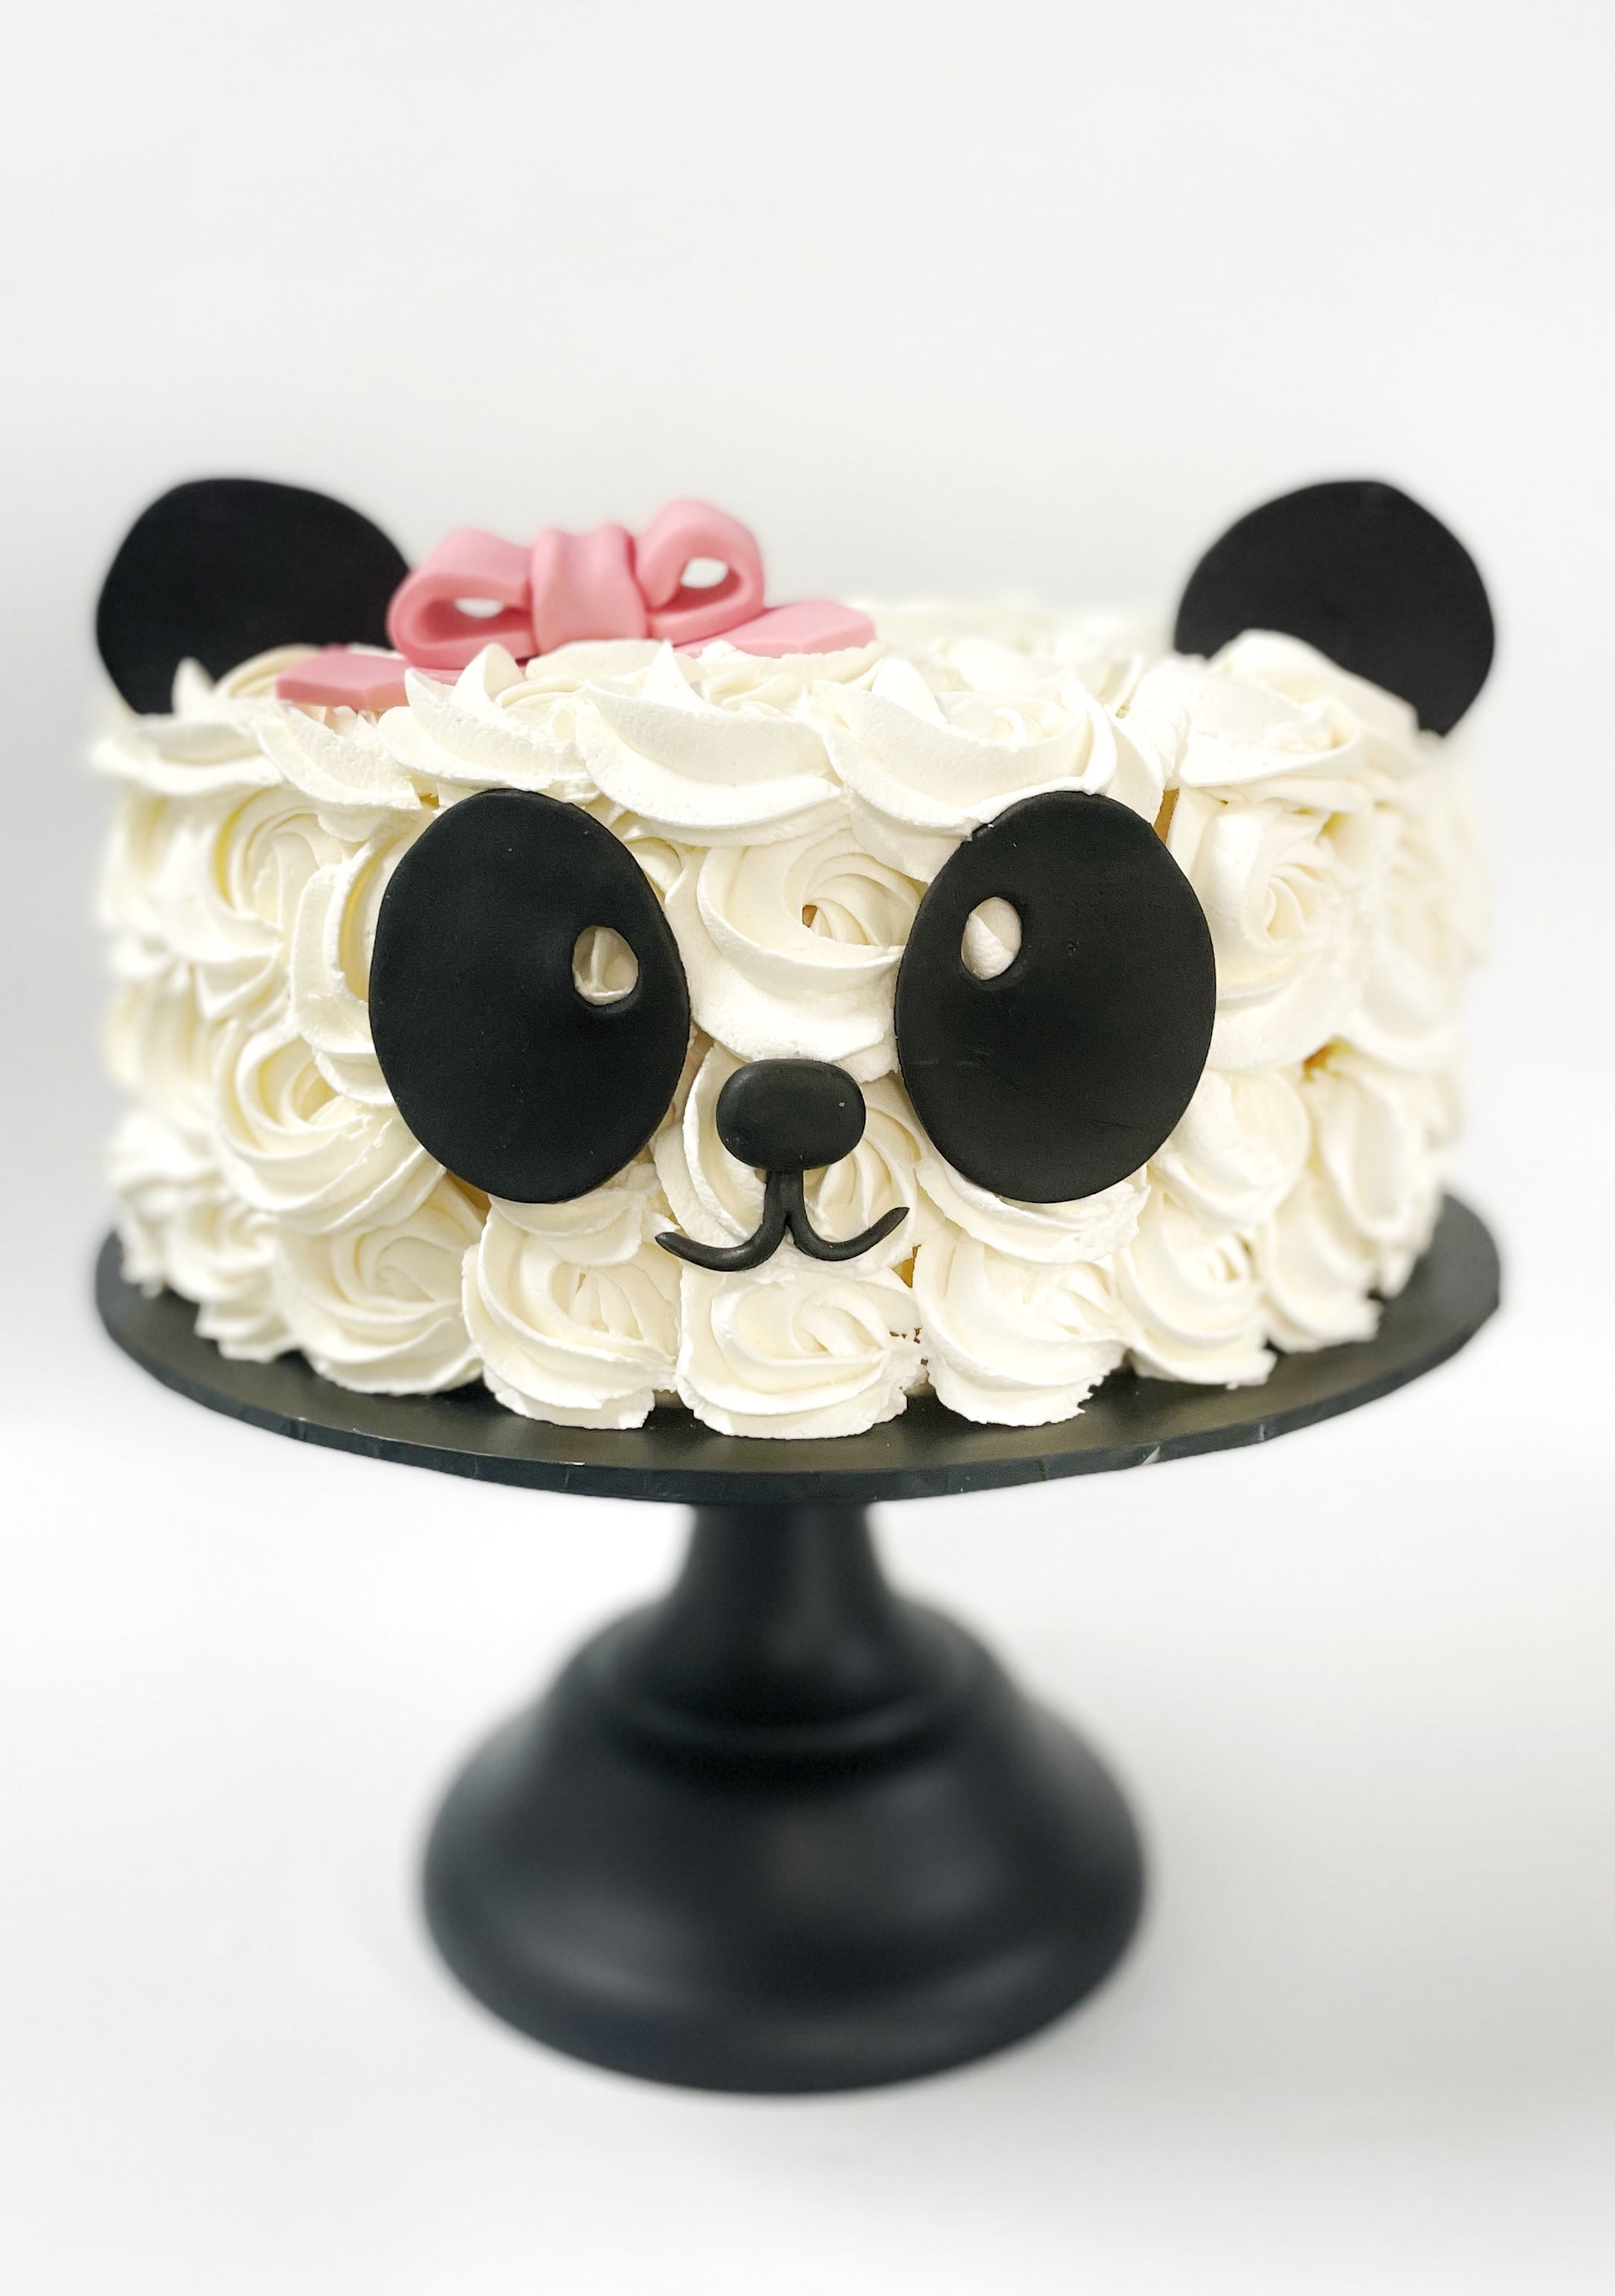 Kung Fu Panda Cake Delivery In Delhi And Noida